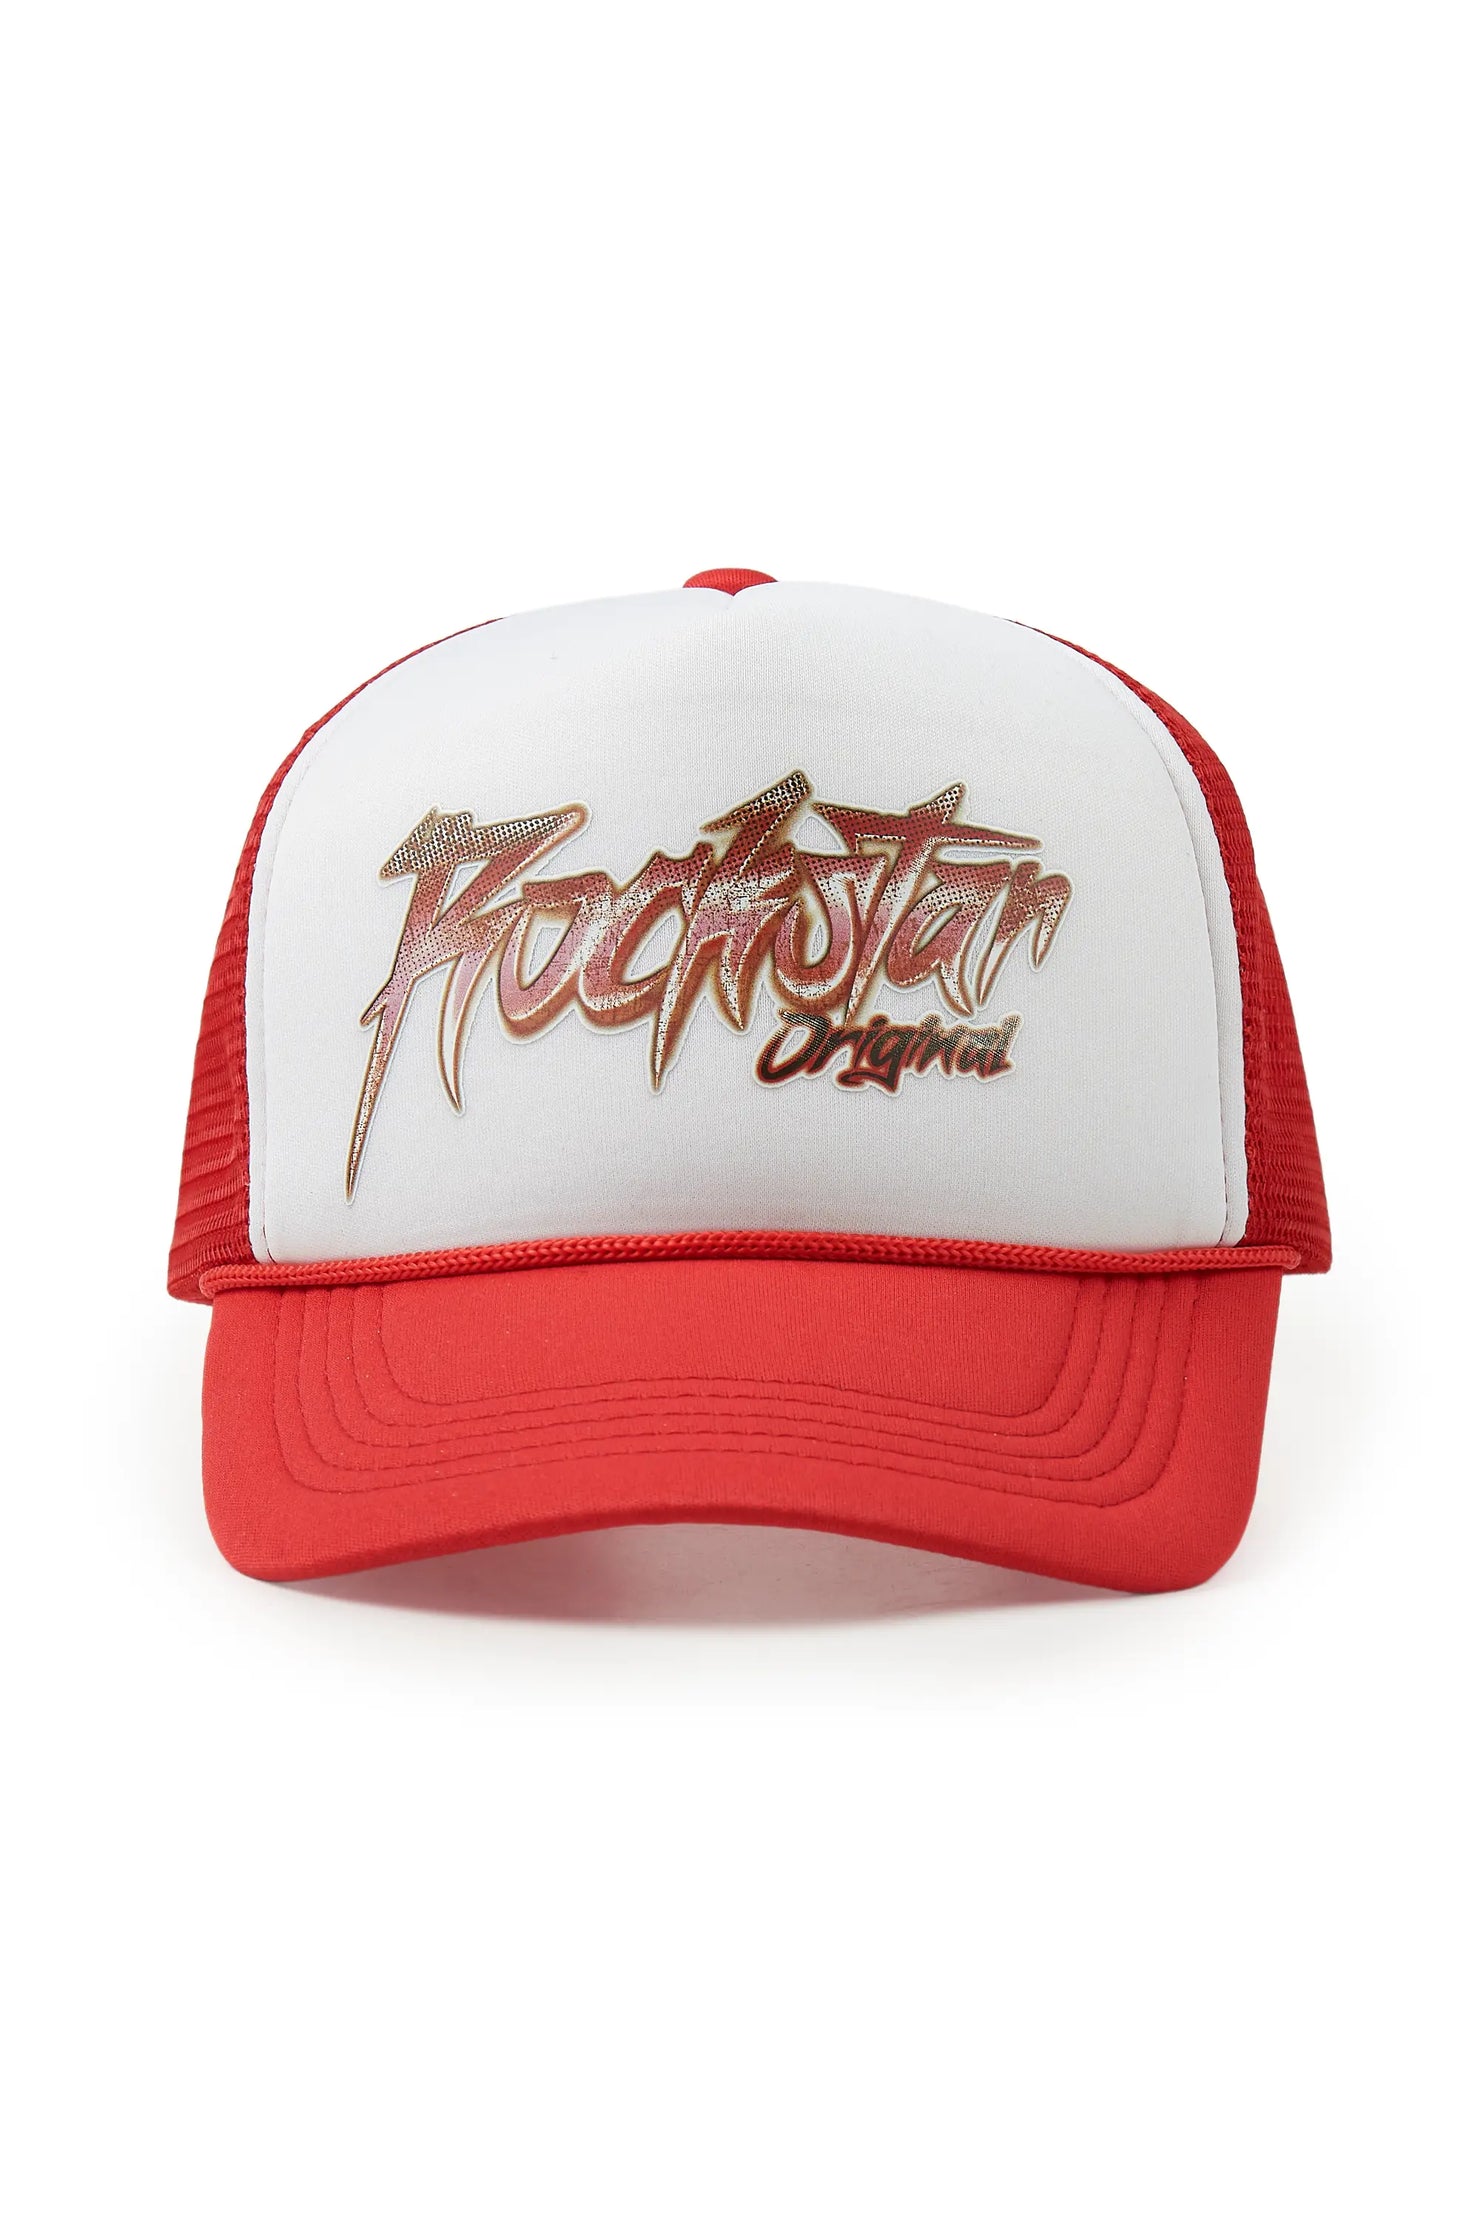 Mikelo White/Red Trucker Hat